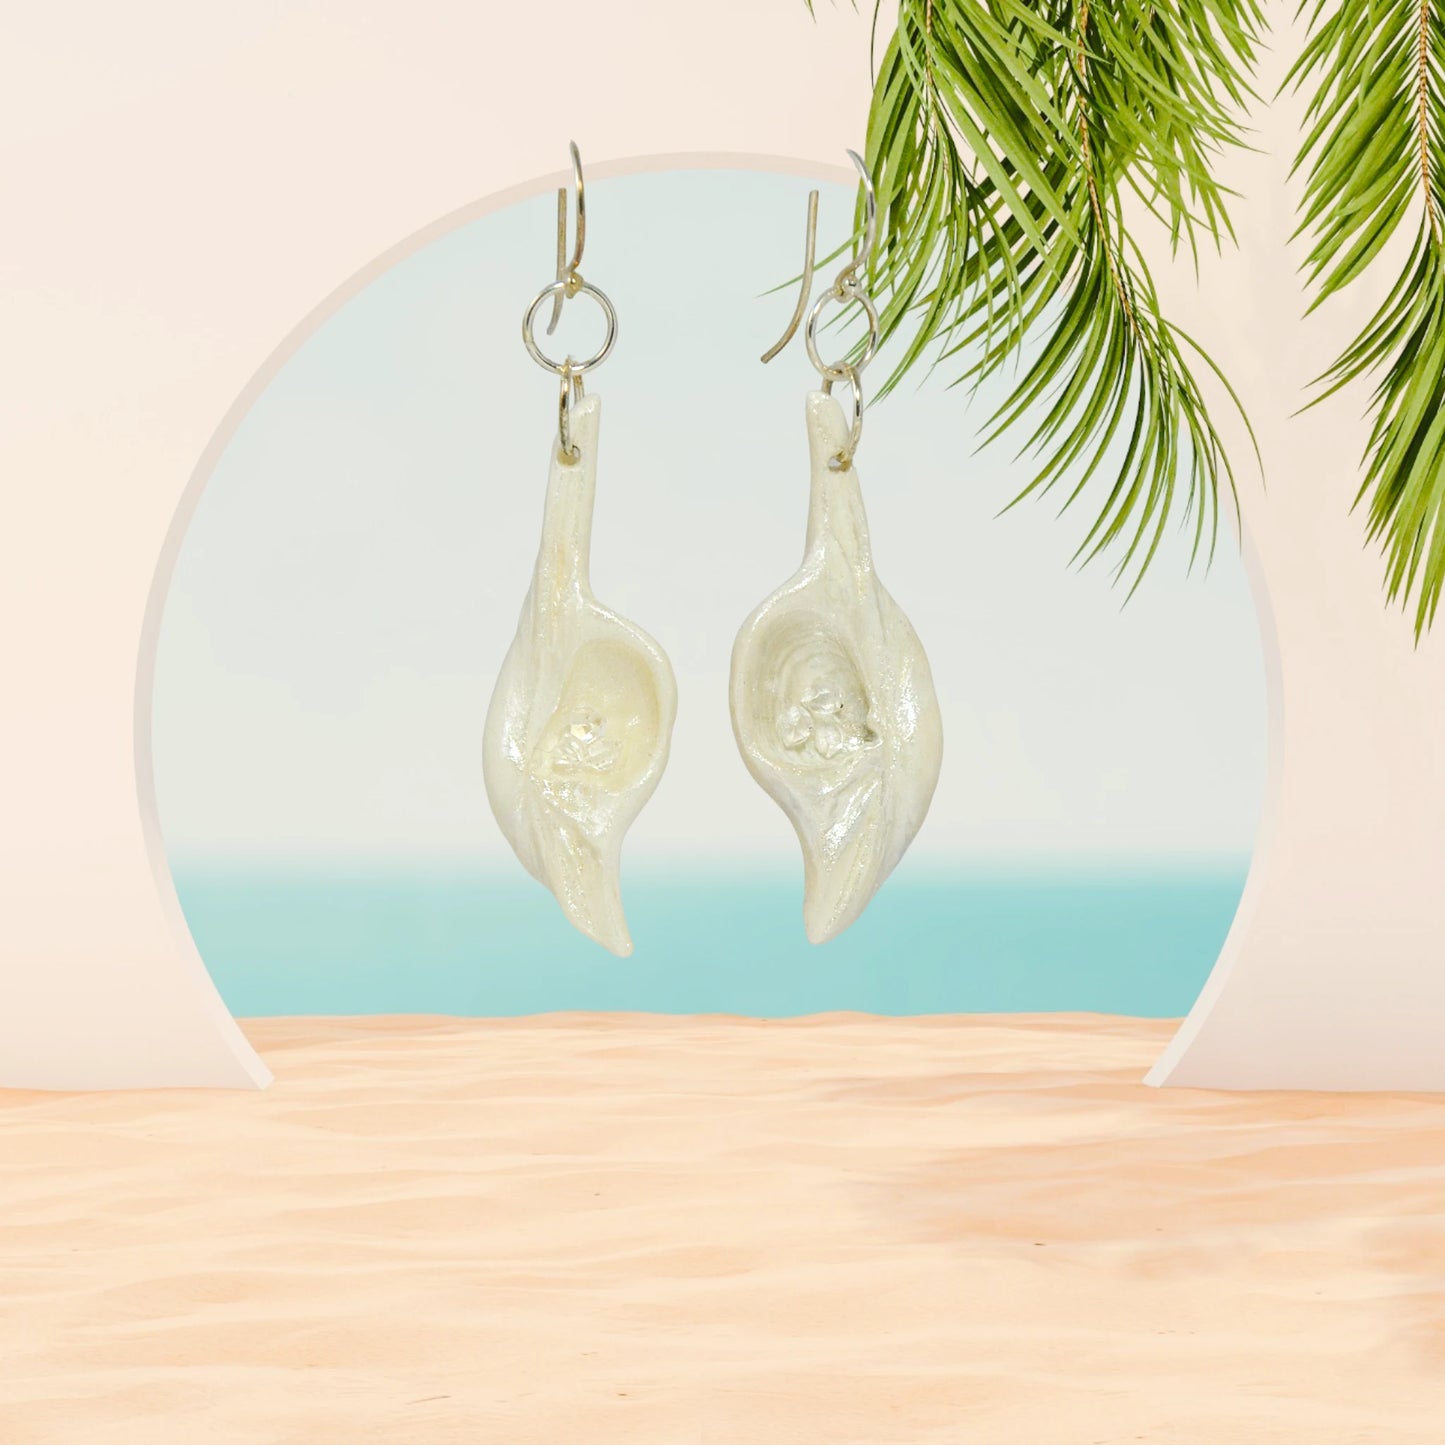 Dream Stone natural seashell earrings with herkimer diamonds. The earring are hanging in a archway looking towards the ocean.